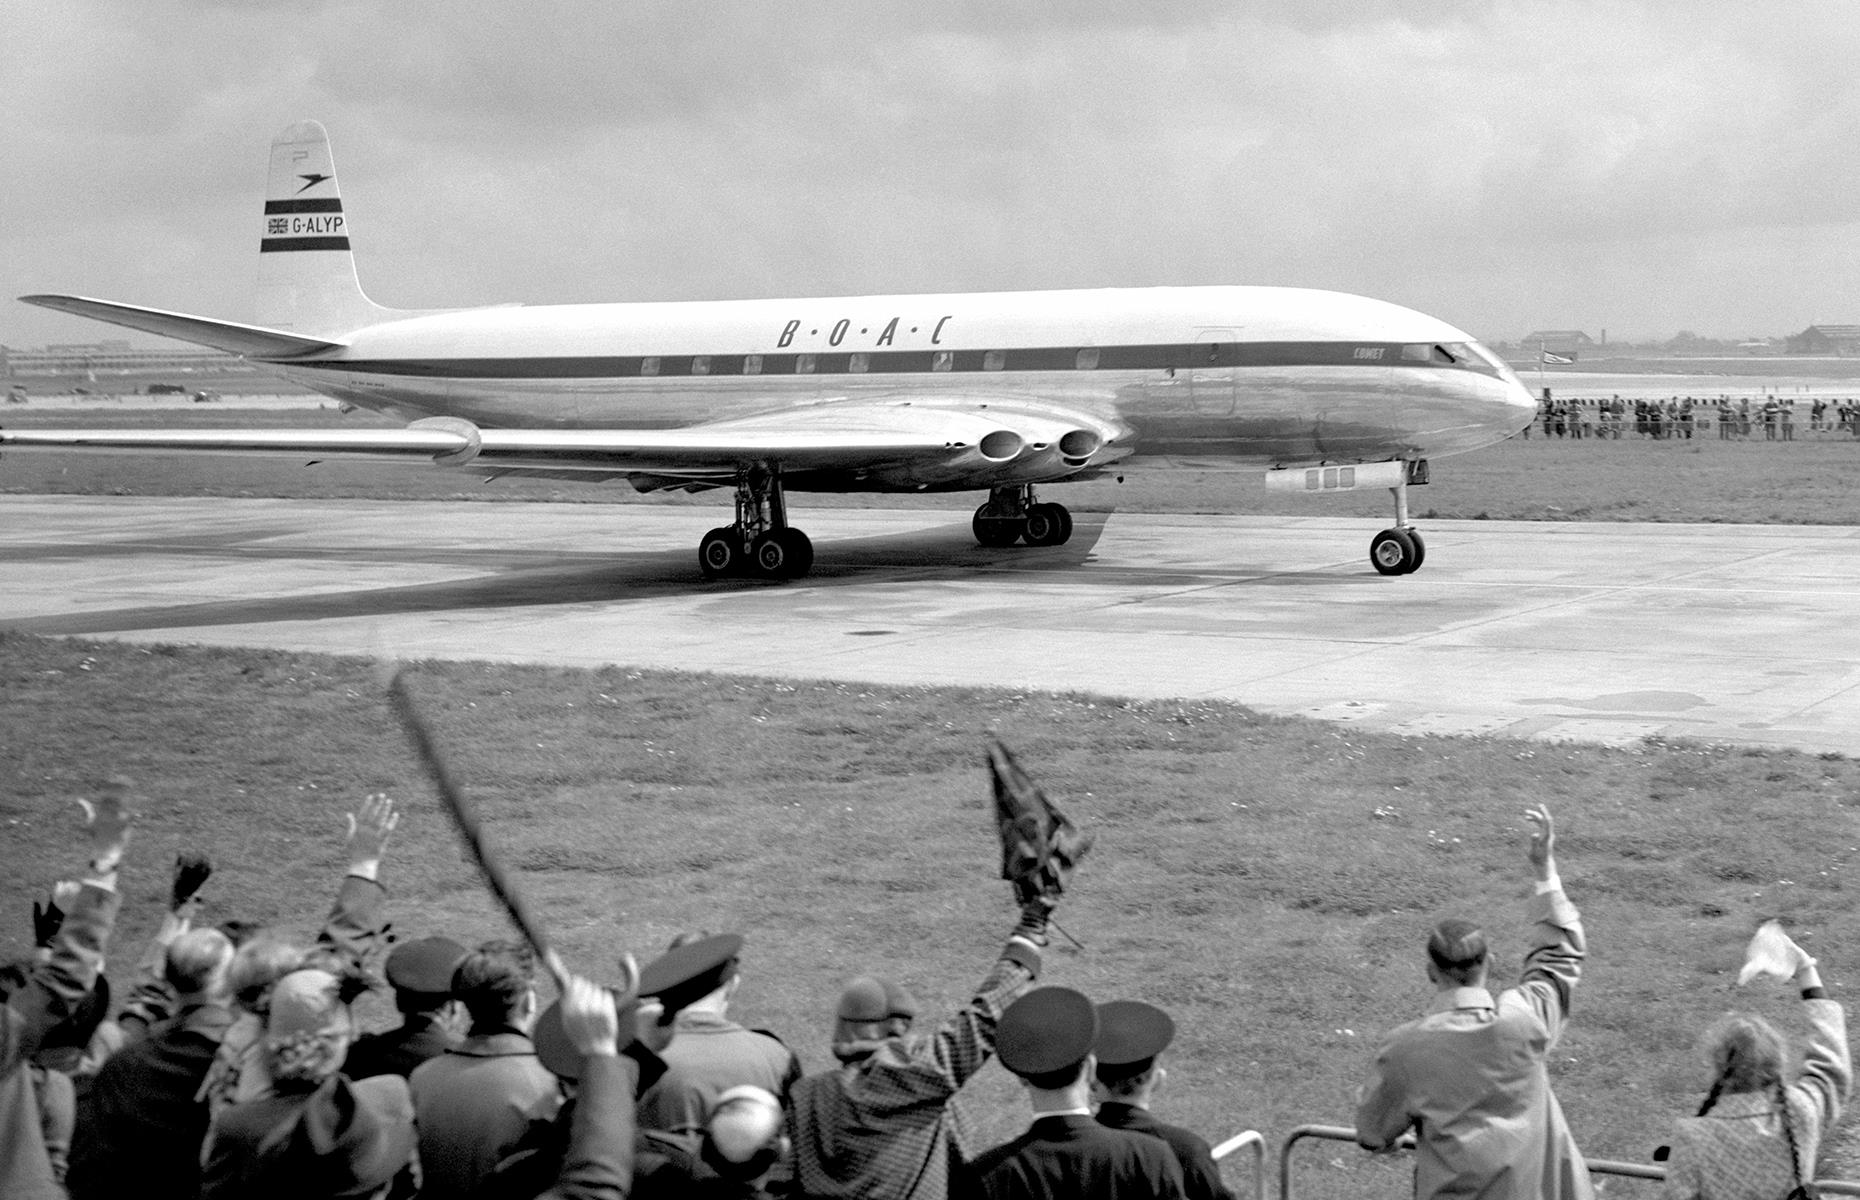 Slide 17 of 51: Commercial air travel boomed through the 1950s and, for the first time in history, more US passengers were traveling by air than train. The 1950s also ushered in the "jet age". The de Havilland DH 106 Comet became the world's first commercial jet airliner, debuting in 1952 with the British Overseas Airways Corporation (BOAC). Here, crowds are seen waving the aircraft off as it leaves London for Johannesburg, South Africa.